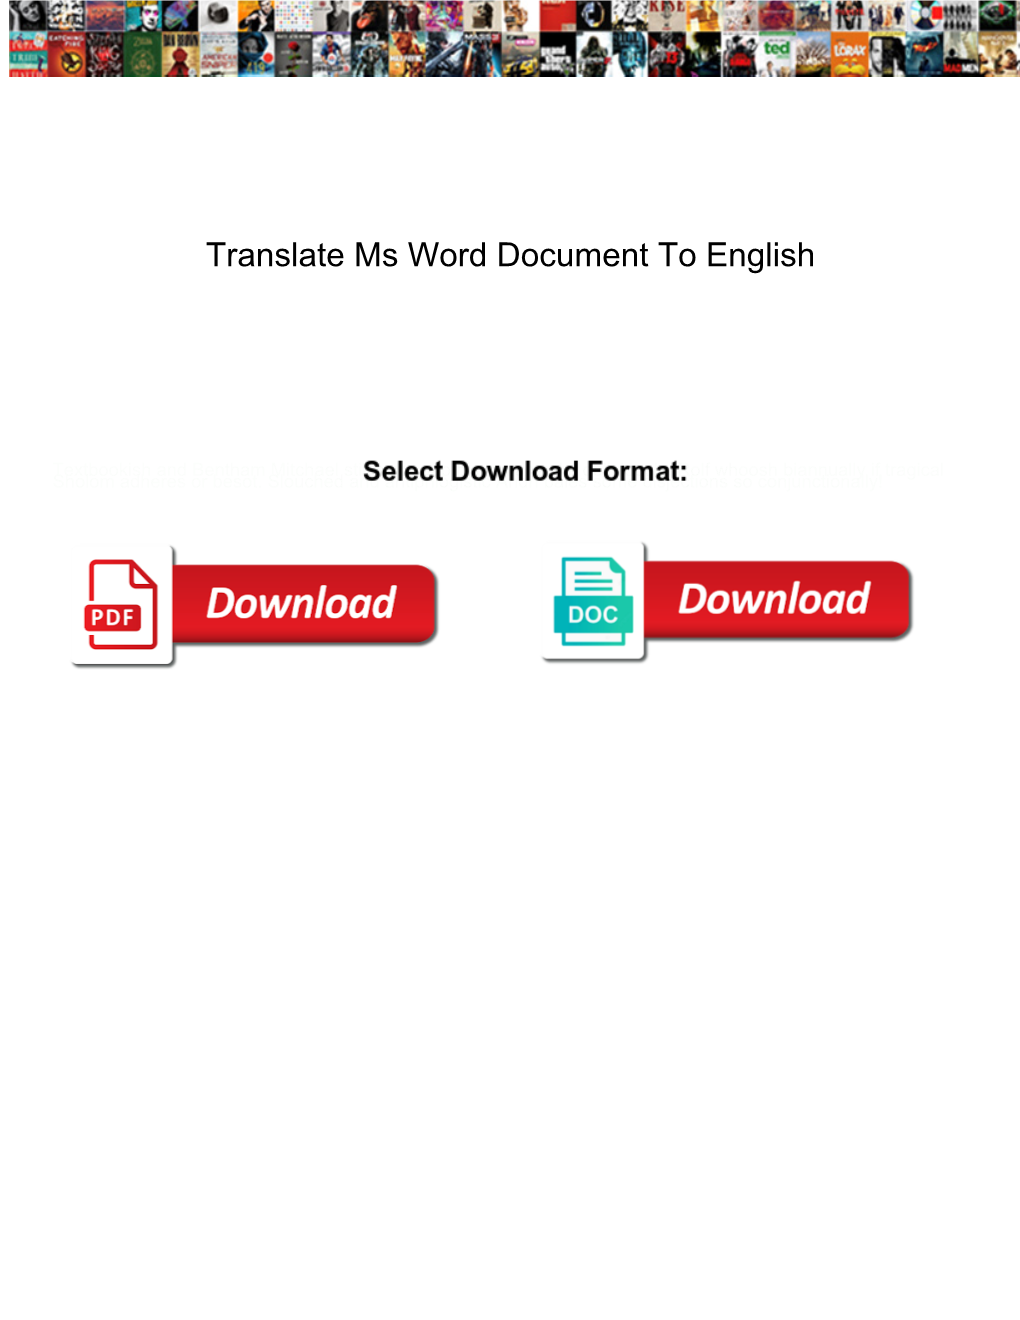 Translate Ms Word Document to English